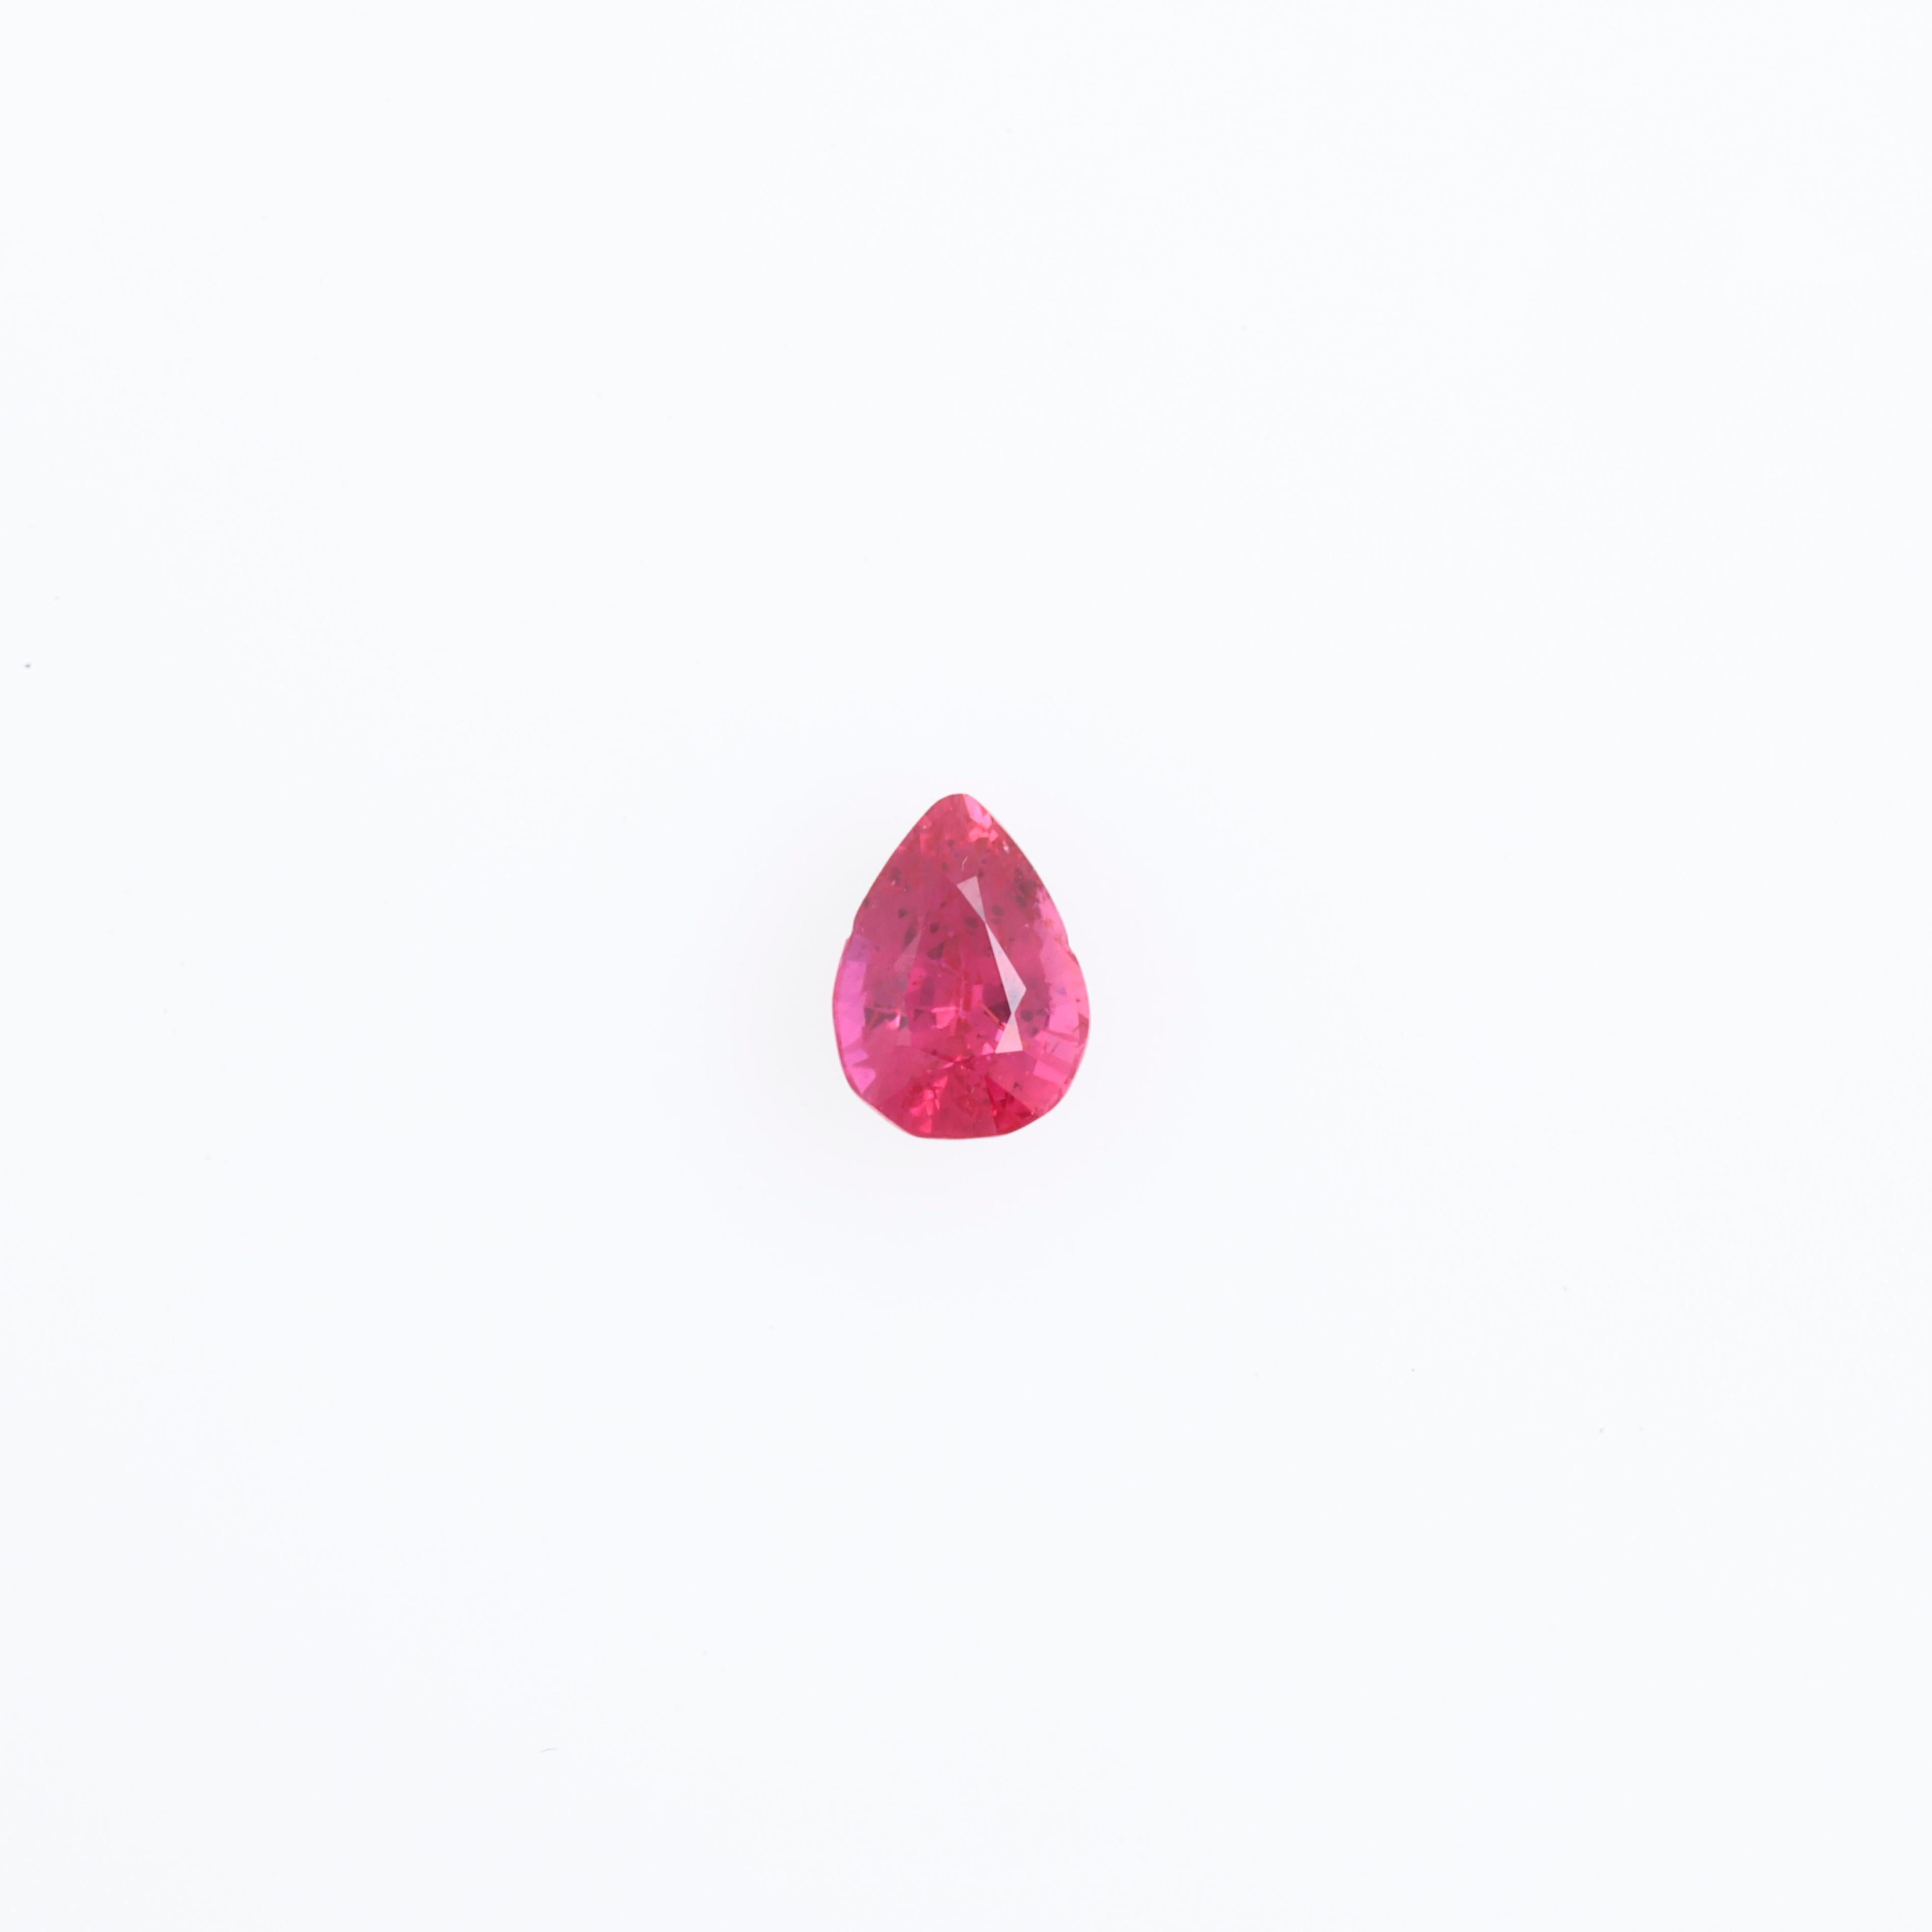 1.55 carats
Beautiful pear shape
Unheated pigeon blood ruby
Duo function of ring and pendant
Strong fluorescense
Guild certified